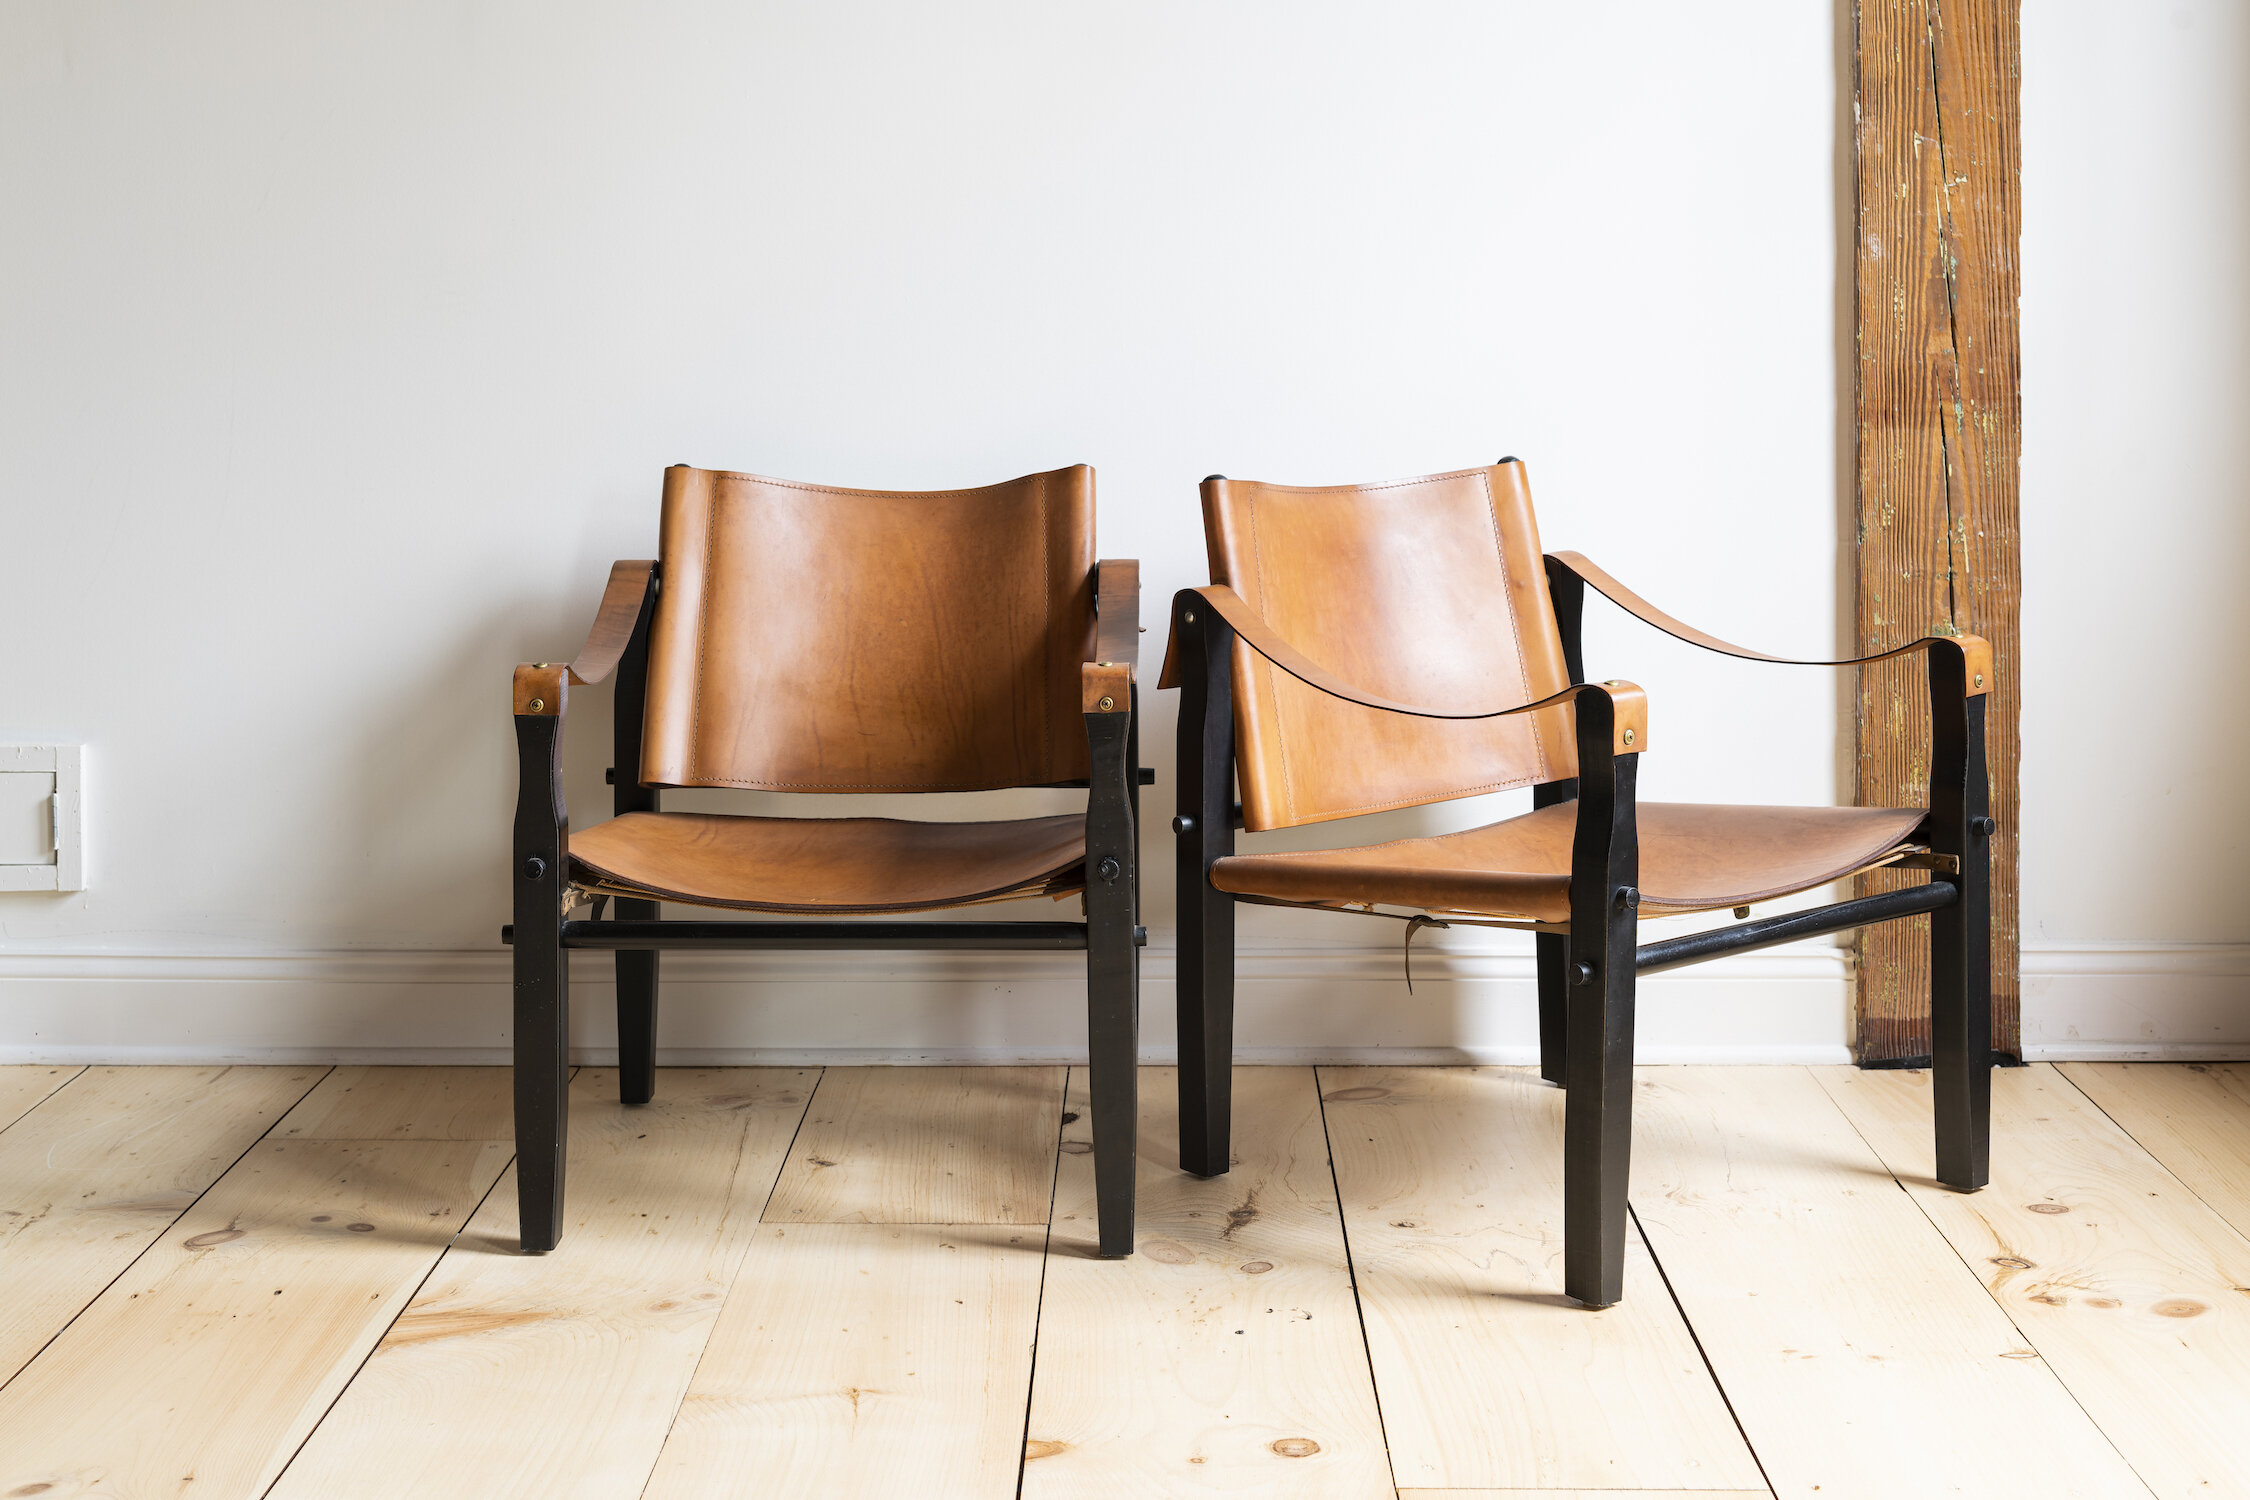 Pair of Leather Safari Chairs